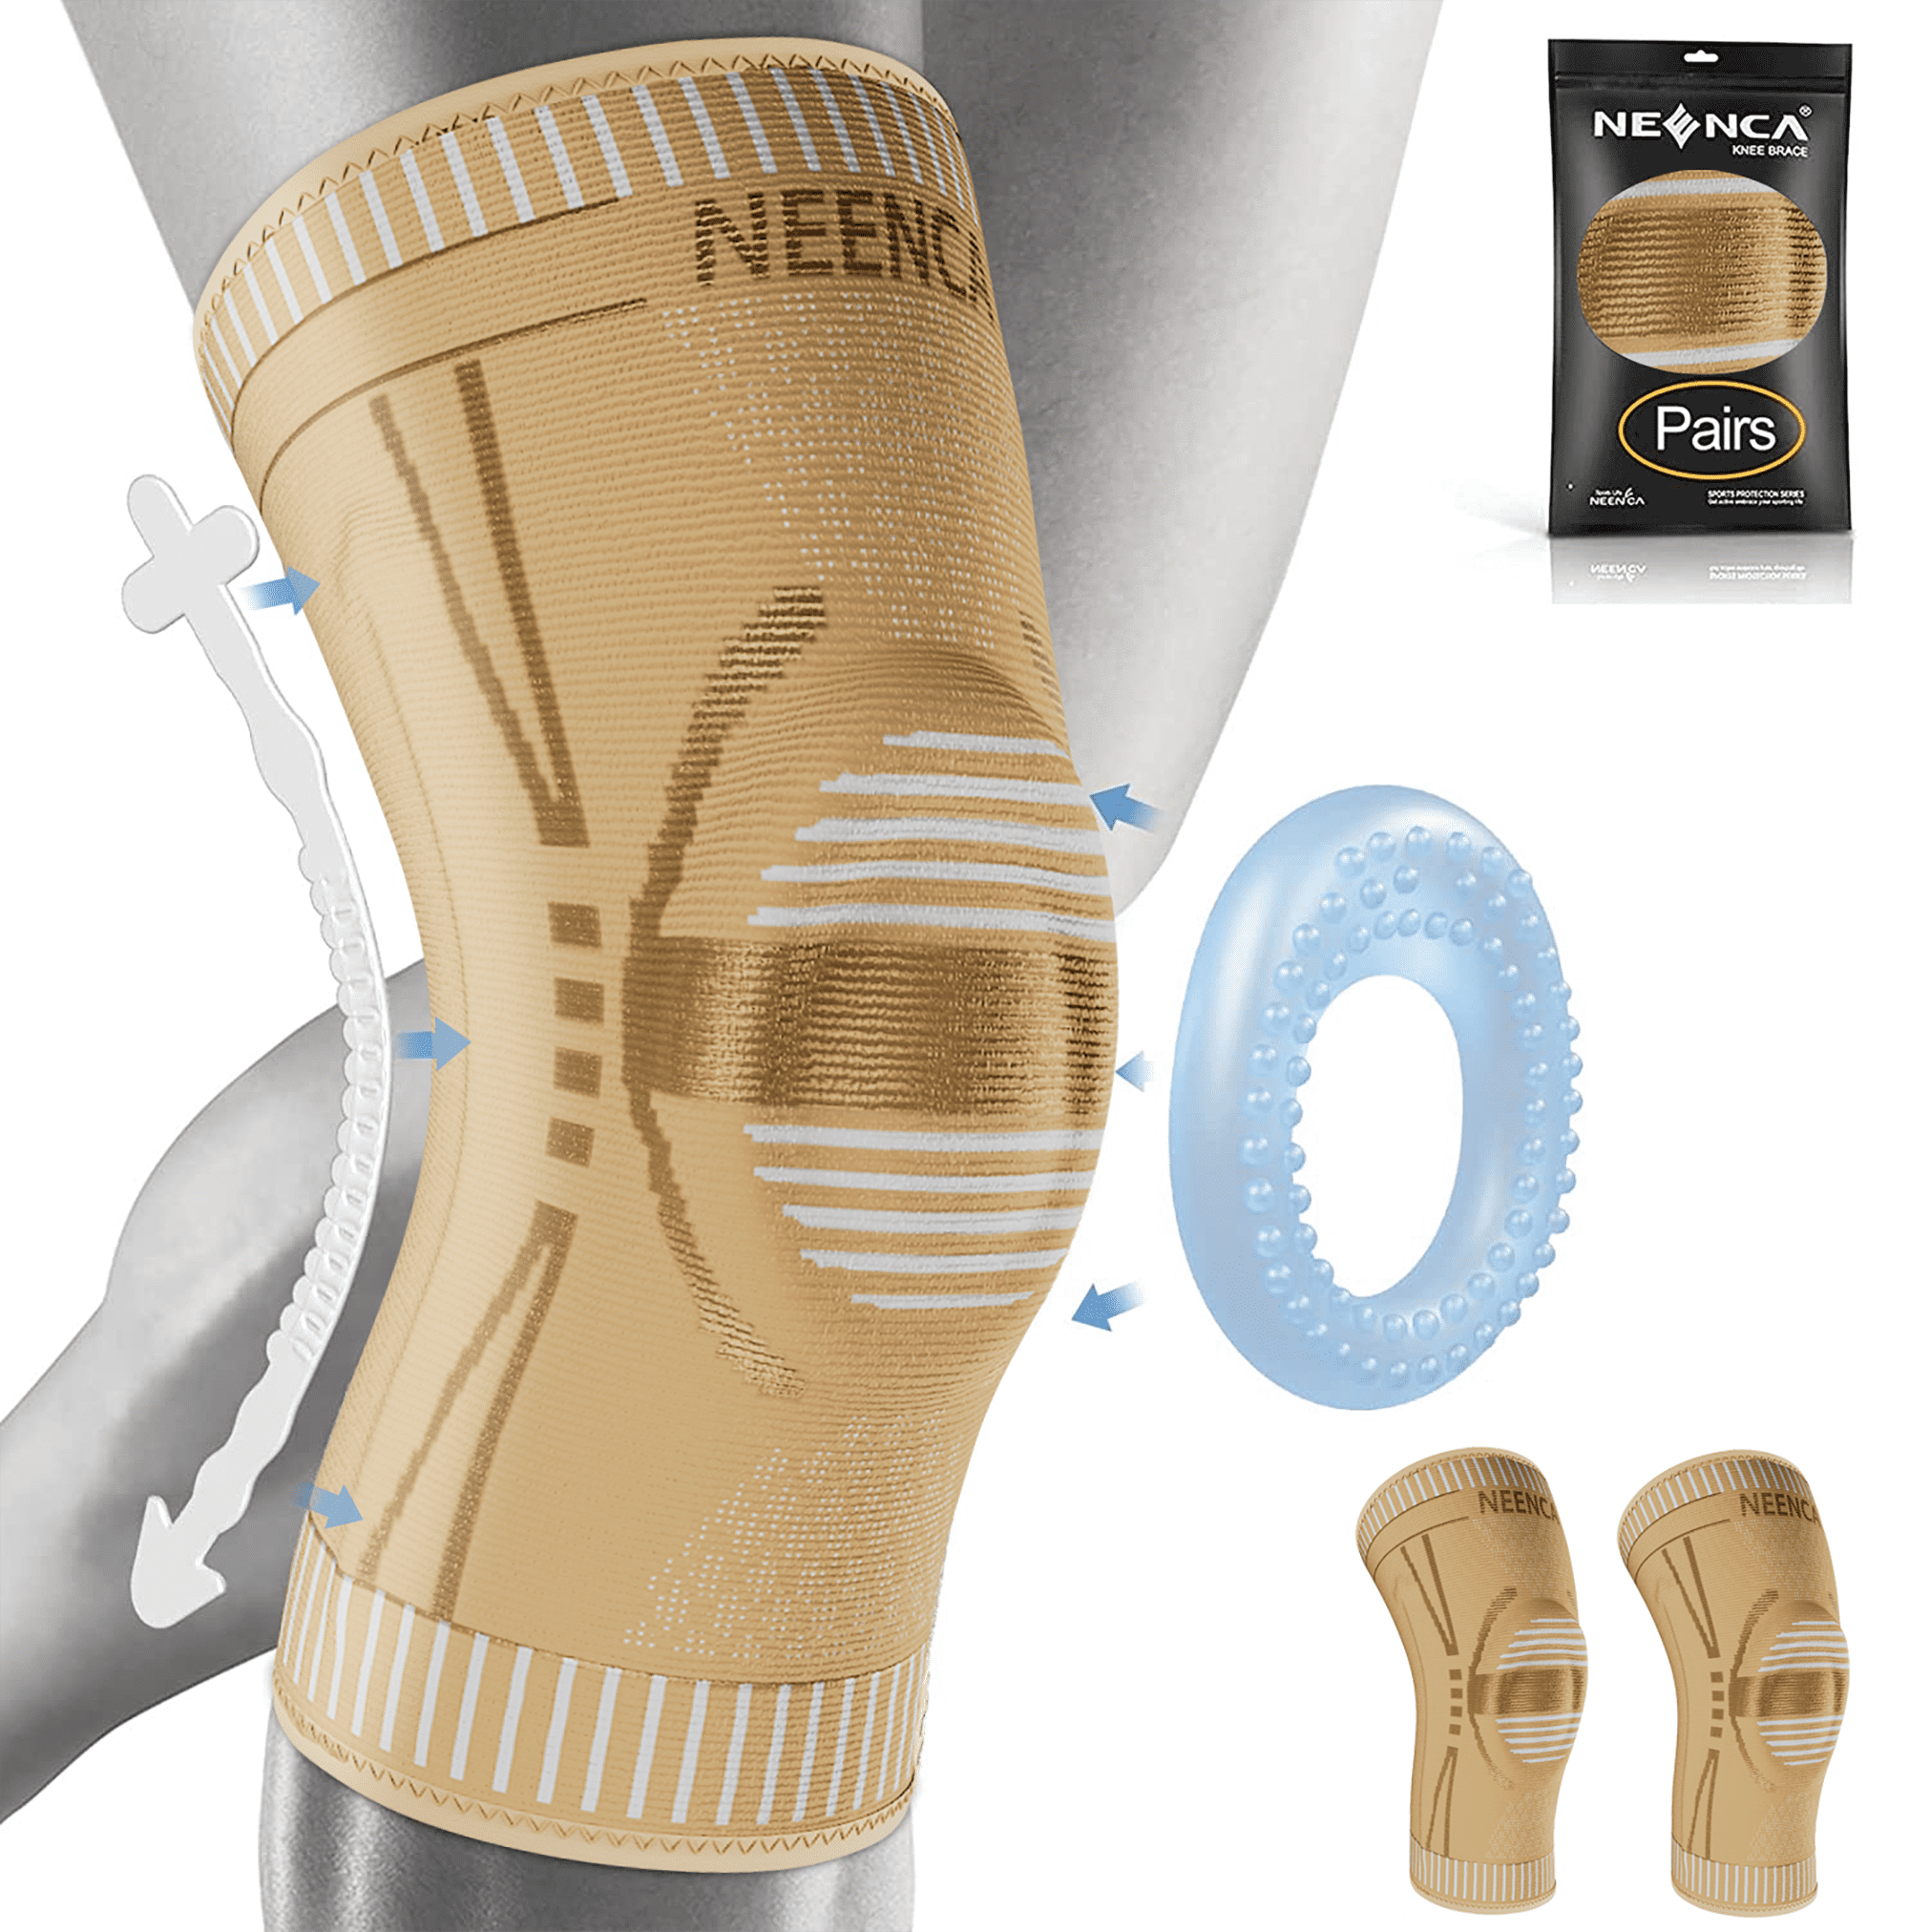 2-Pack Copper Knee Braces, Neenca Knee Pads, Medical Knee Support,  Gold(2XL) 